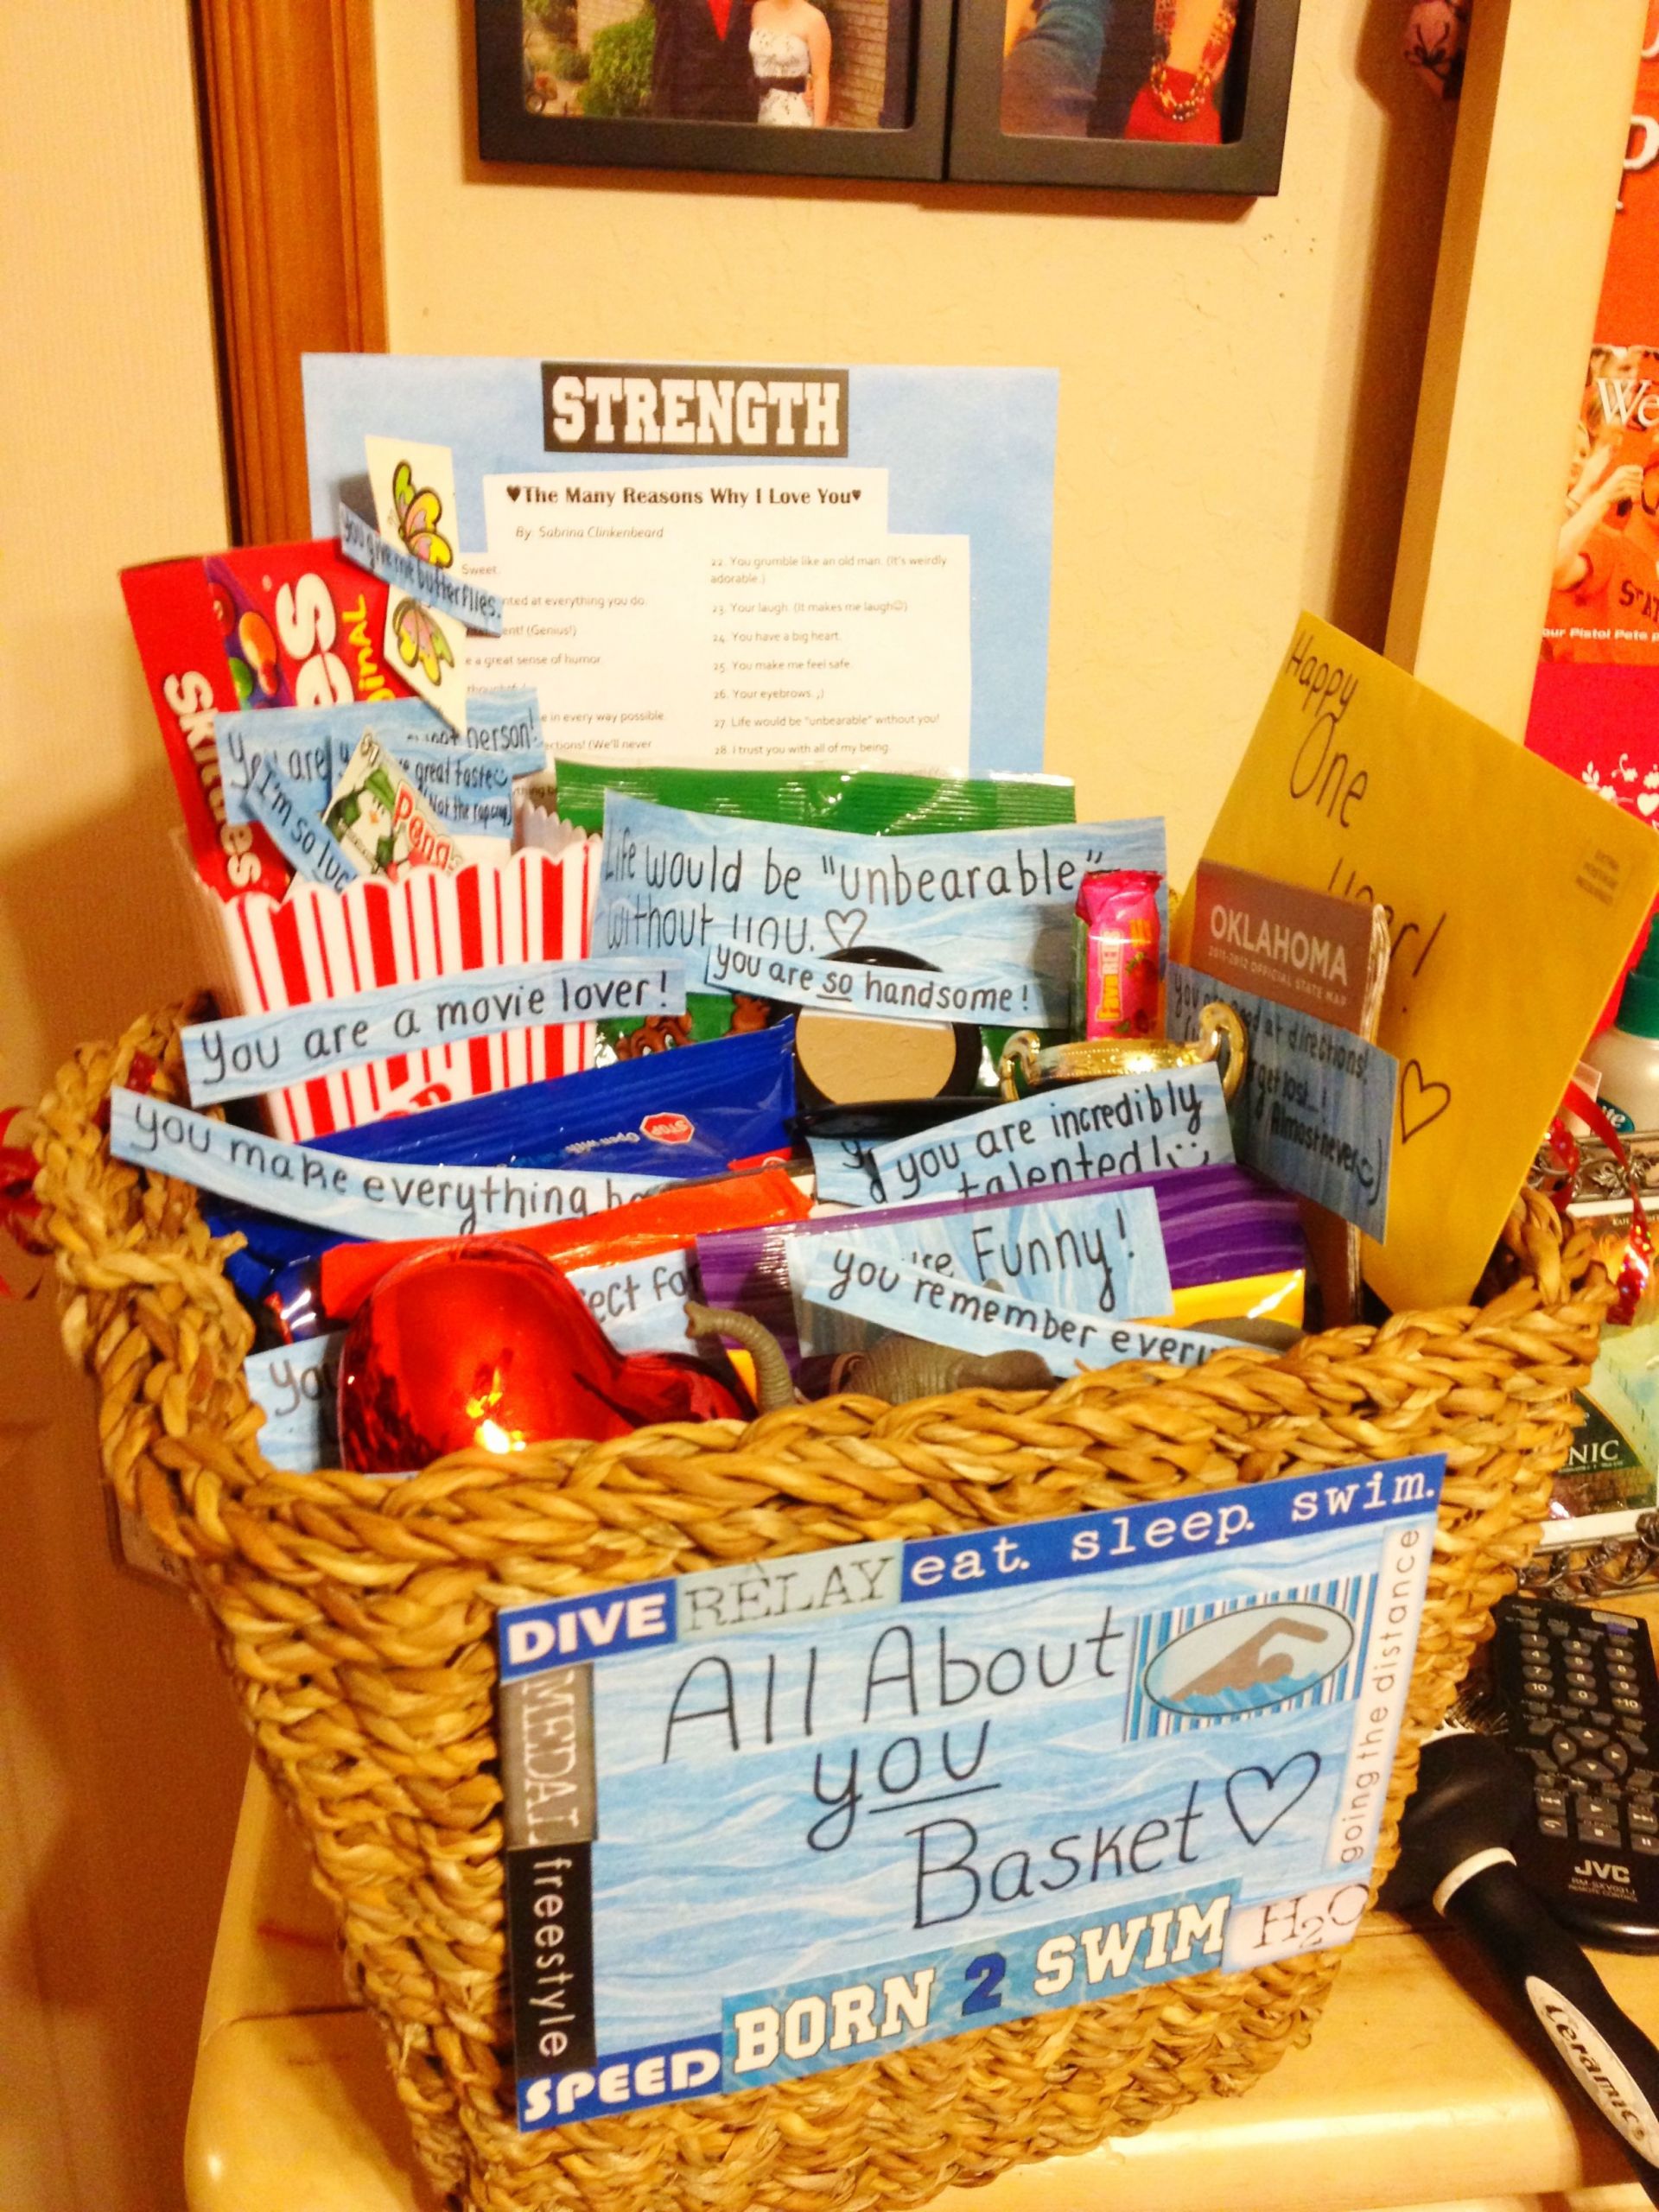 Thoughtful Gift Ideas For Boyfriends
 All about you basket for an anniversary Very sweet and